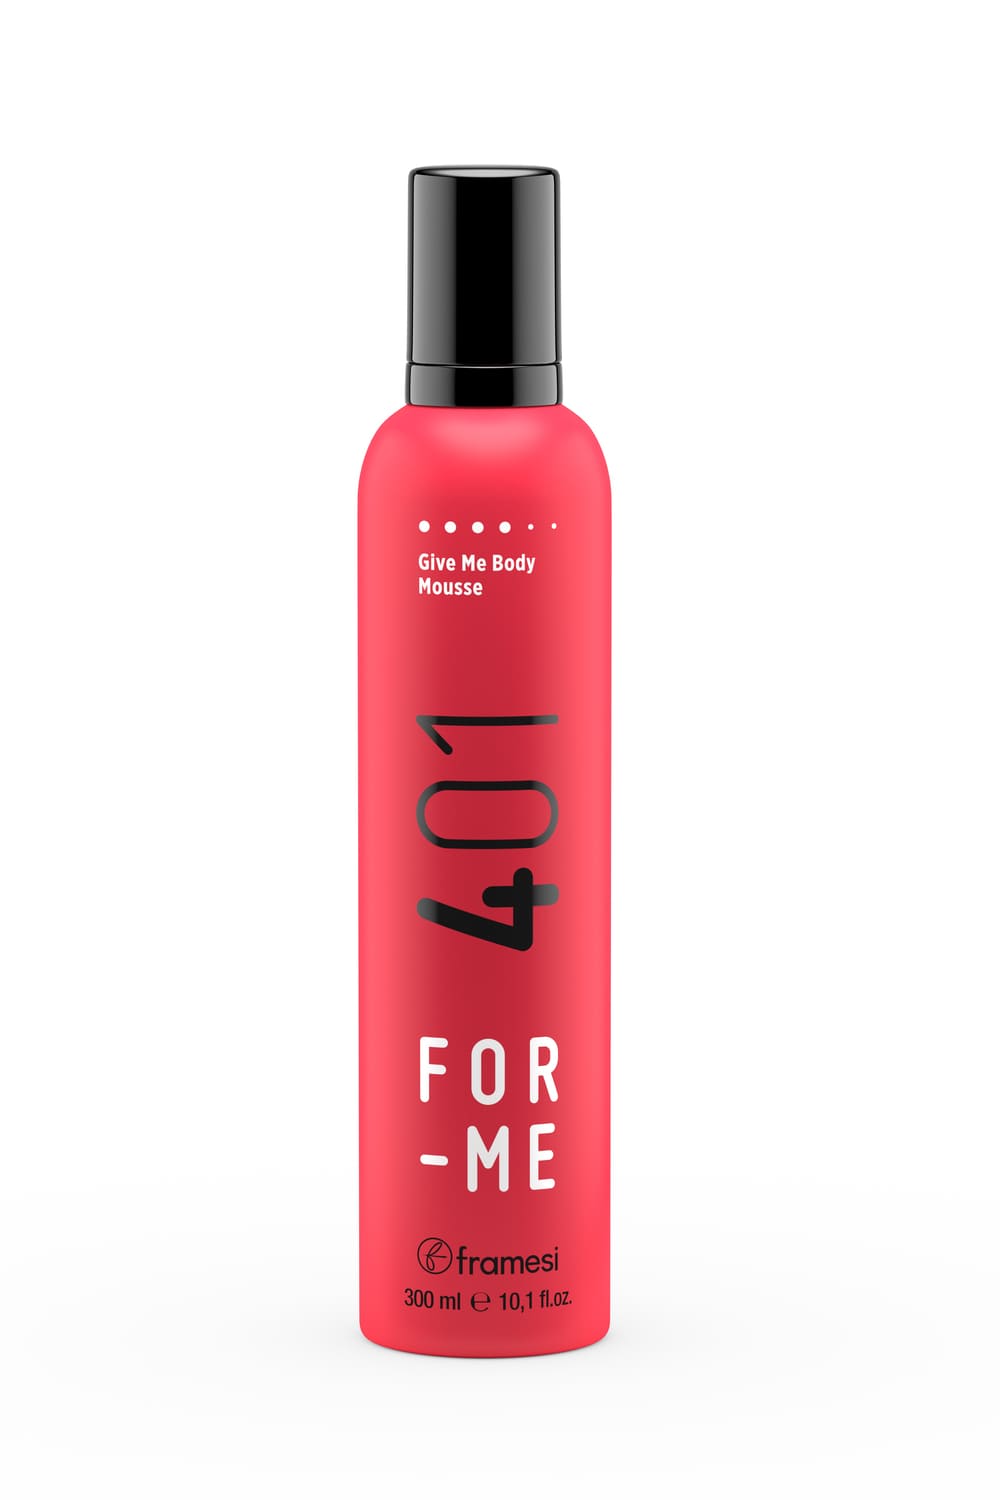 FOR ME_401_GIVE ME BODY MOUSSE_300 ML